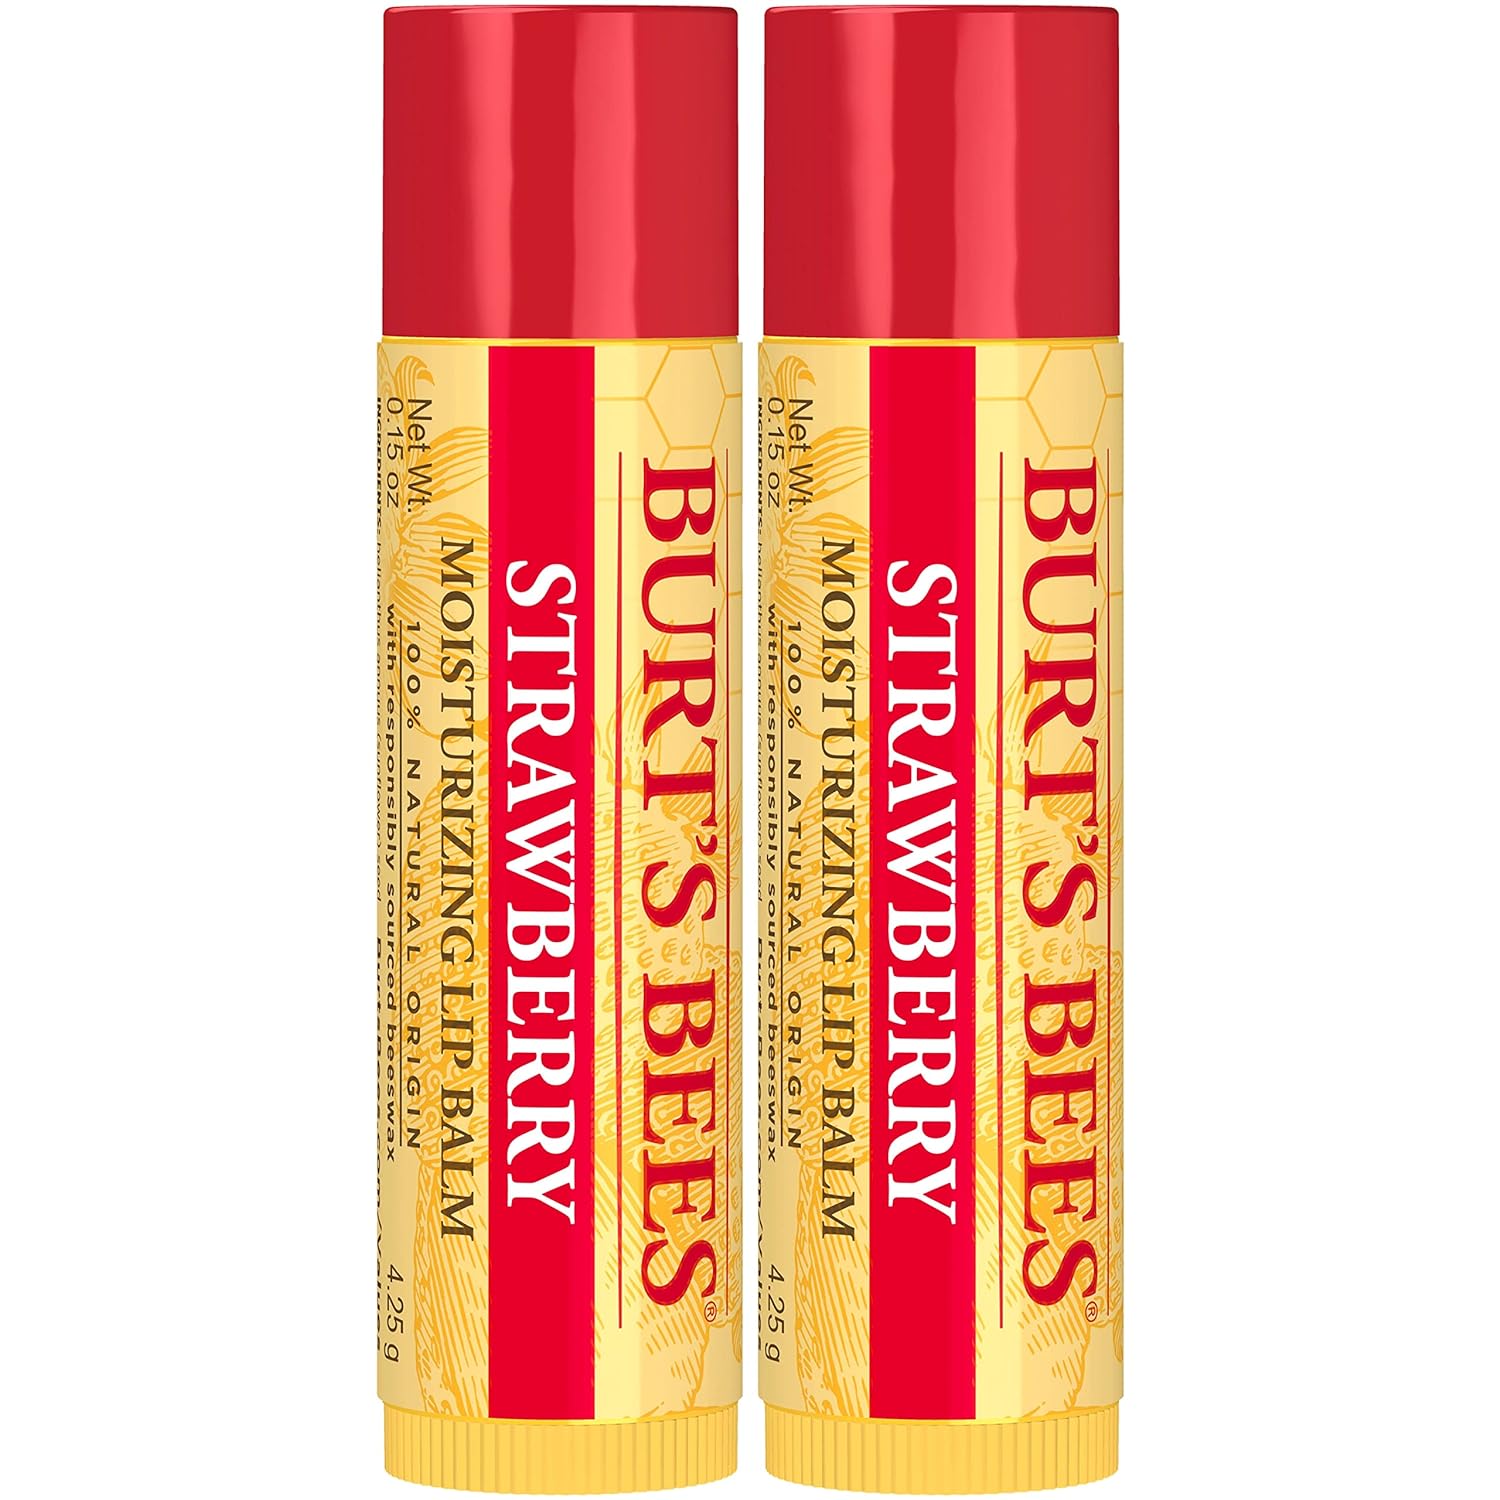 Burts Bees Lip Balm Valentines Day Gifts, Pink Grapefruit, Mango, Coconut And Pear  Pomegranate, With Responsibly Sourced Beeswax, Tint-Free, Natural Conditioning Lip Treatment, 4 Tubes, 0.15 Oz.